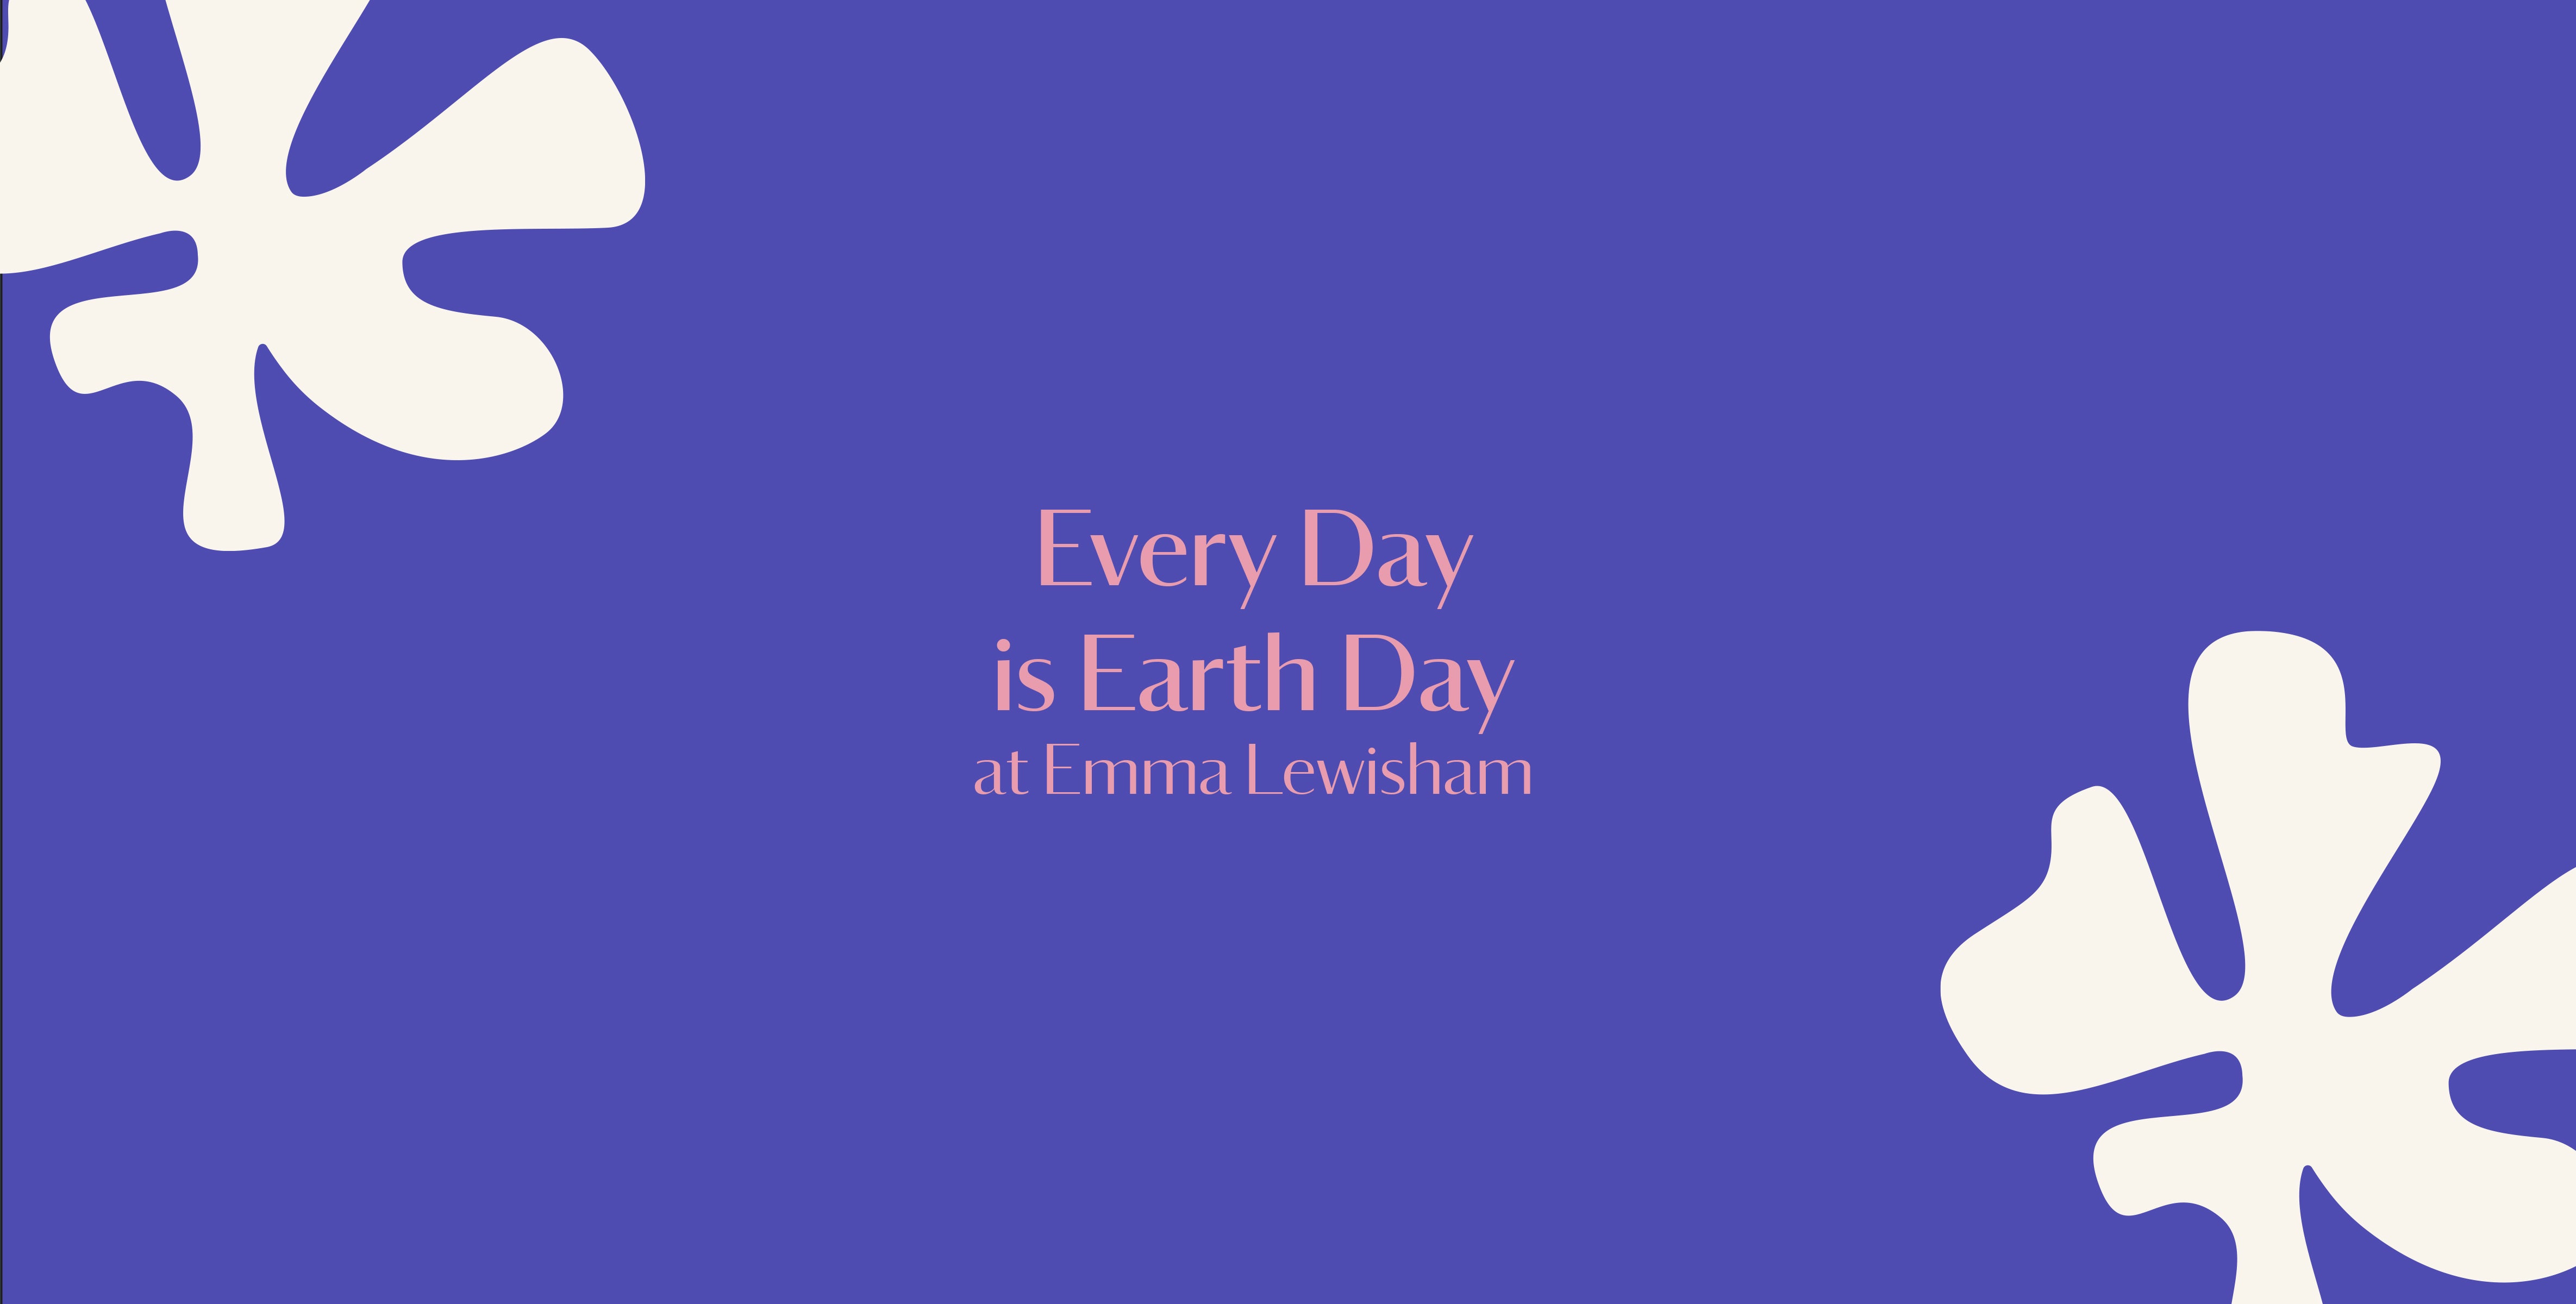 Earth day is every day at Emma Lewisham